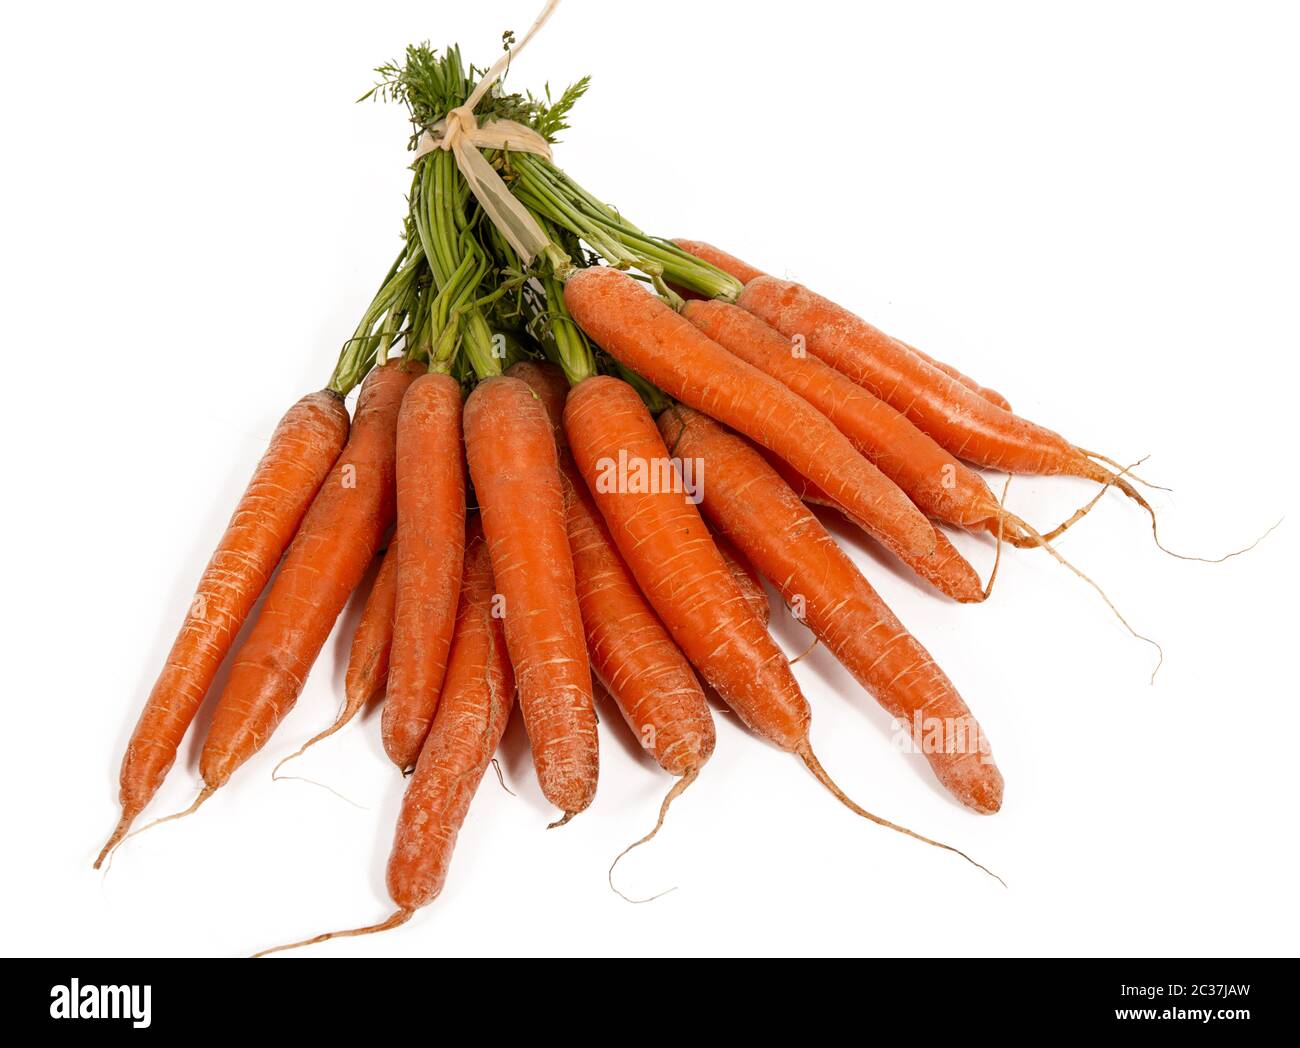 carrot bunch isolated on white background Stock Photo